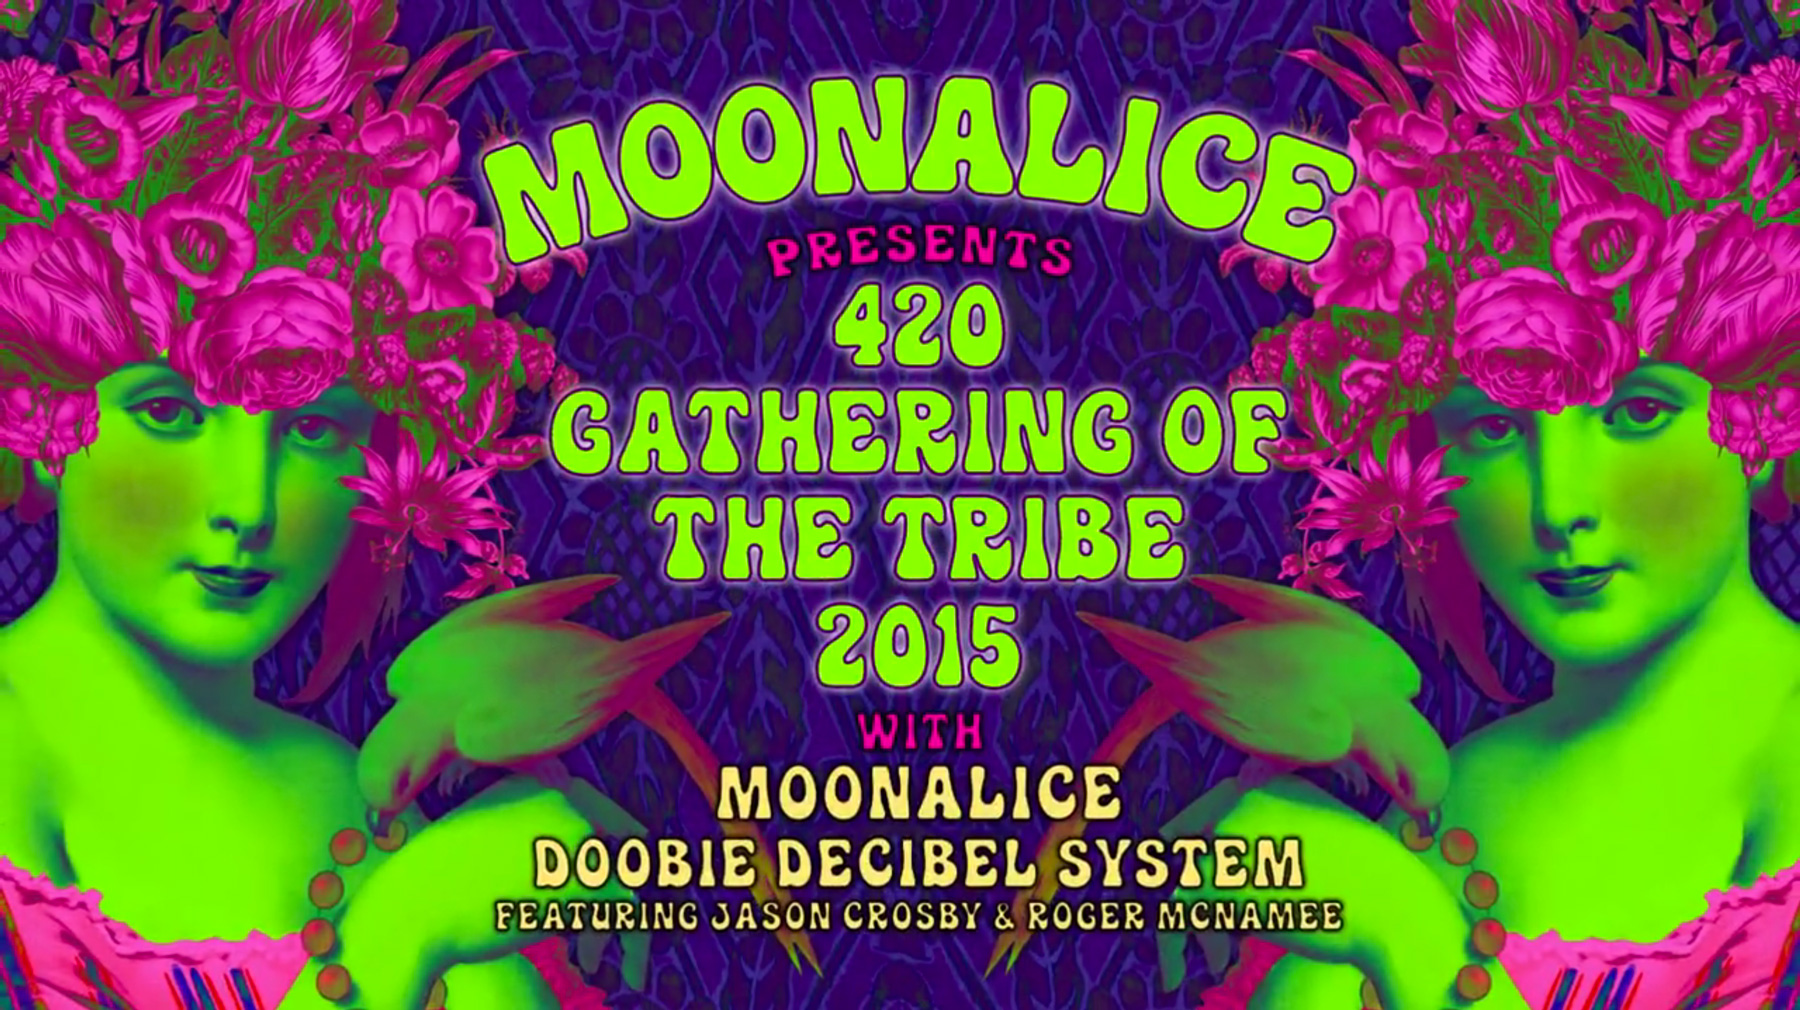 Moonalice presents 420 Gathering of the Tribe 2015